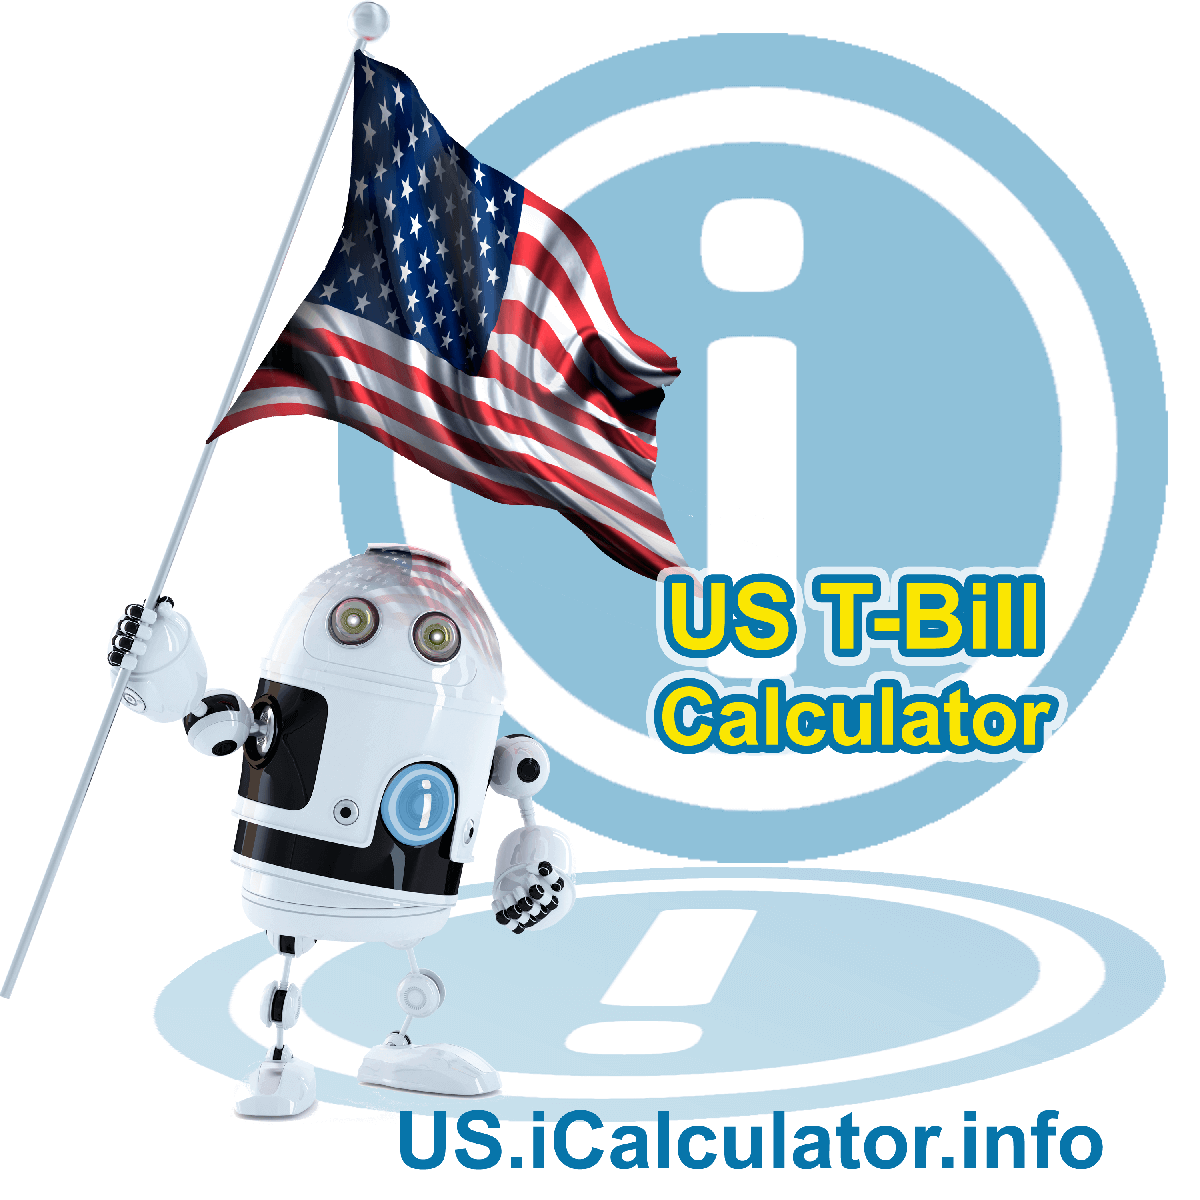 US T-Bill Calculator will calculate the 3 monthly interest on a Treasury Bill, the annual interest on a T-bill and other T-bill periods depending on the duration of the T-bill bond, the face value and the amount paid for the T-bill during the auction process.